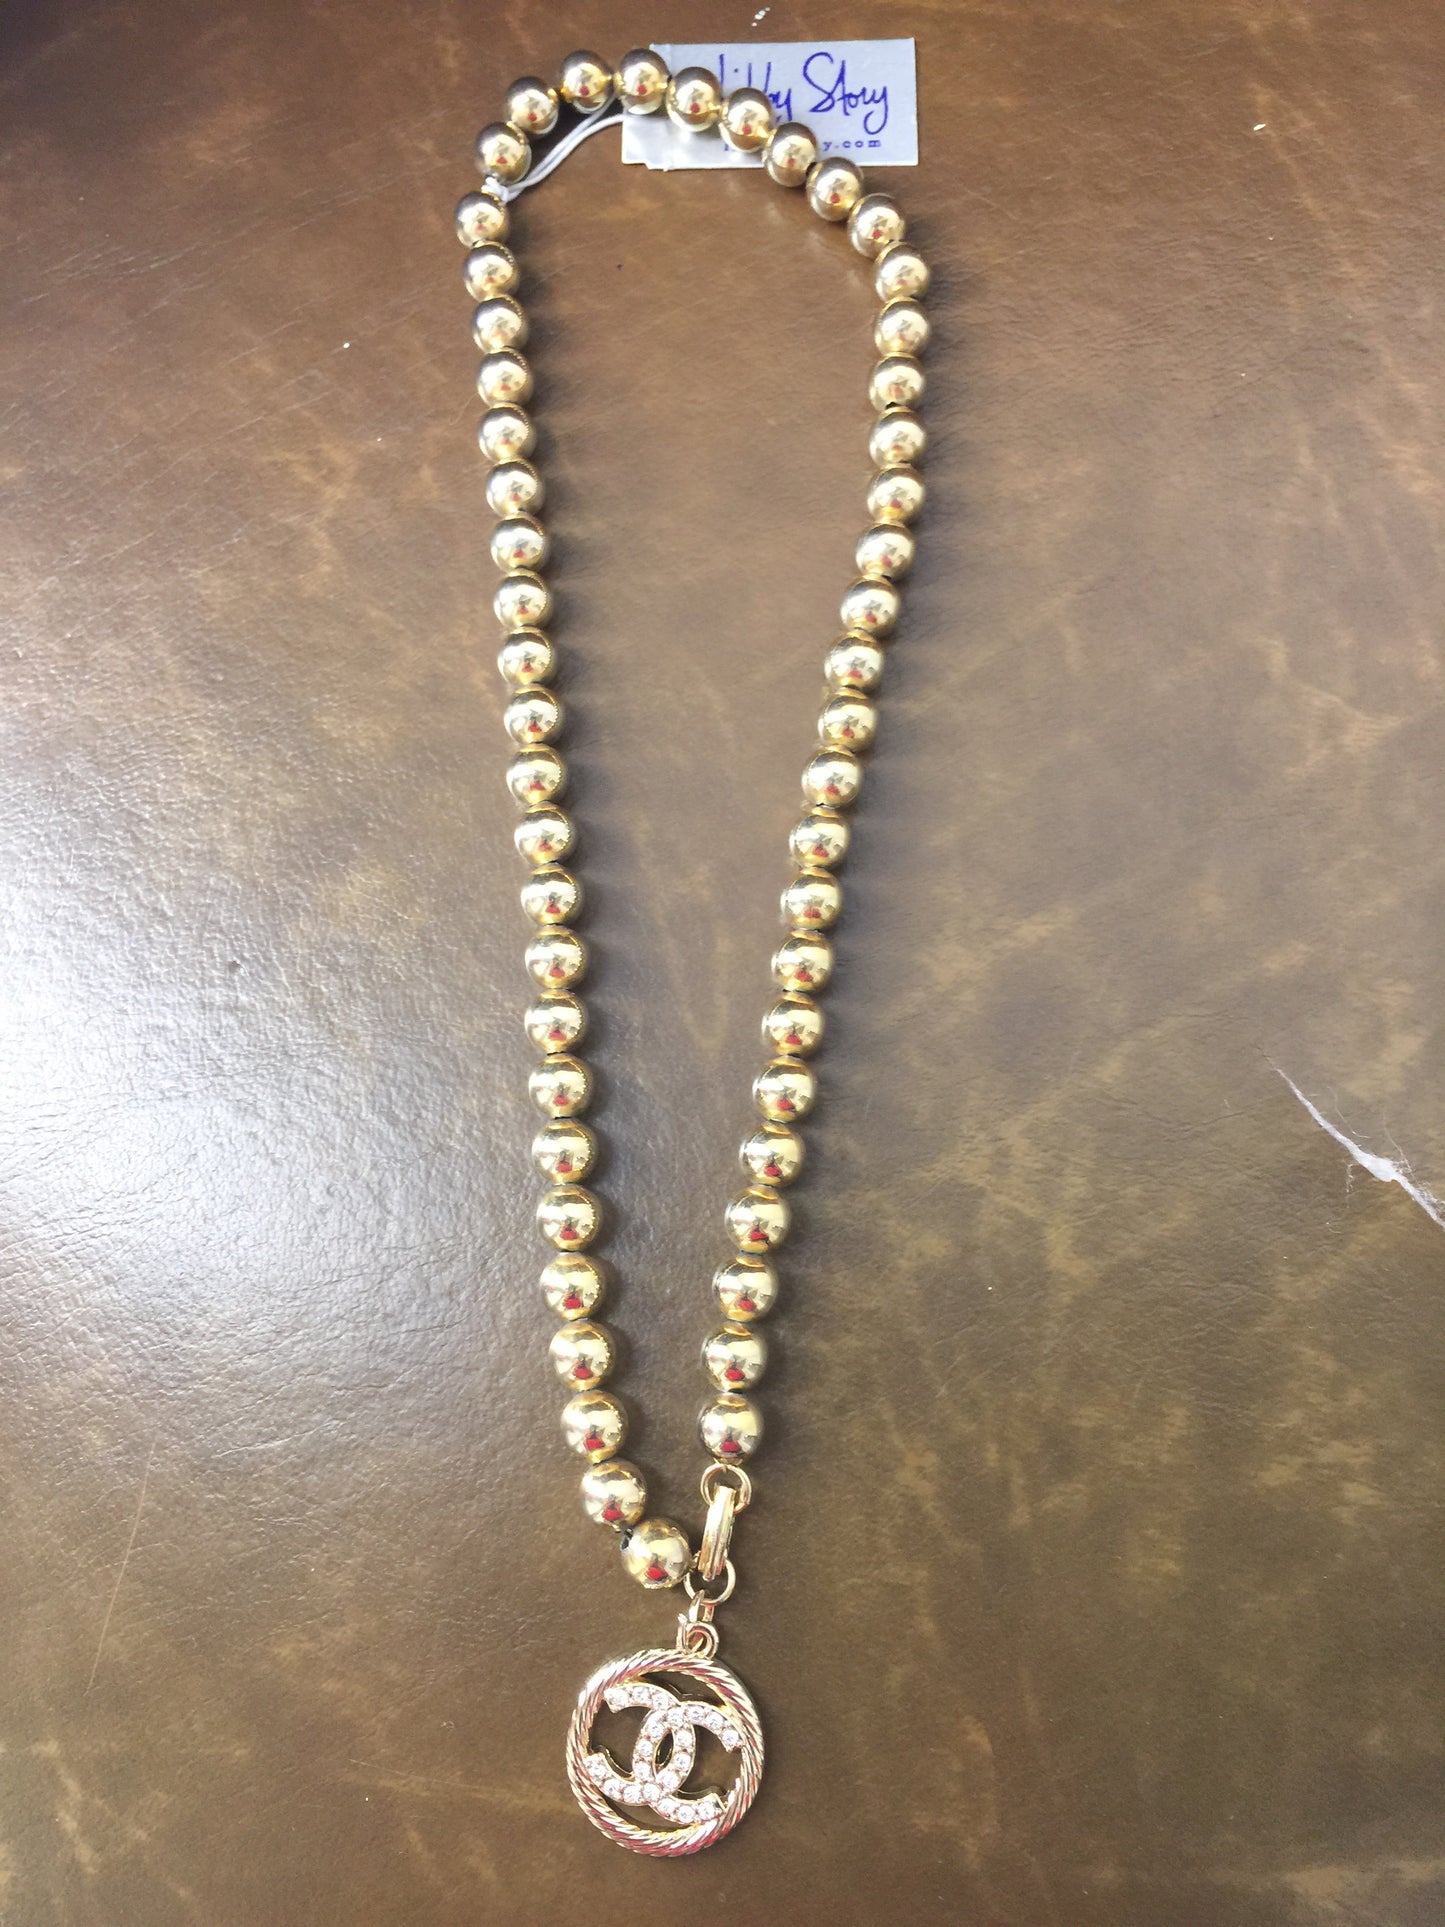 LS Upcycled Rhinestone CC Ball Chain Necklace